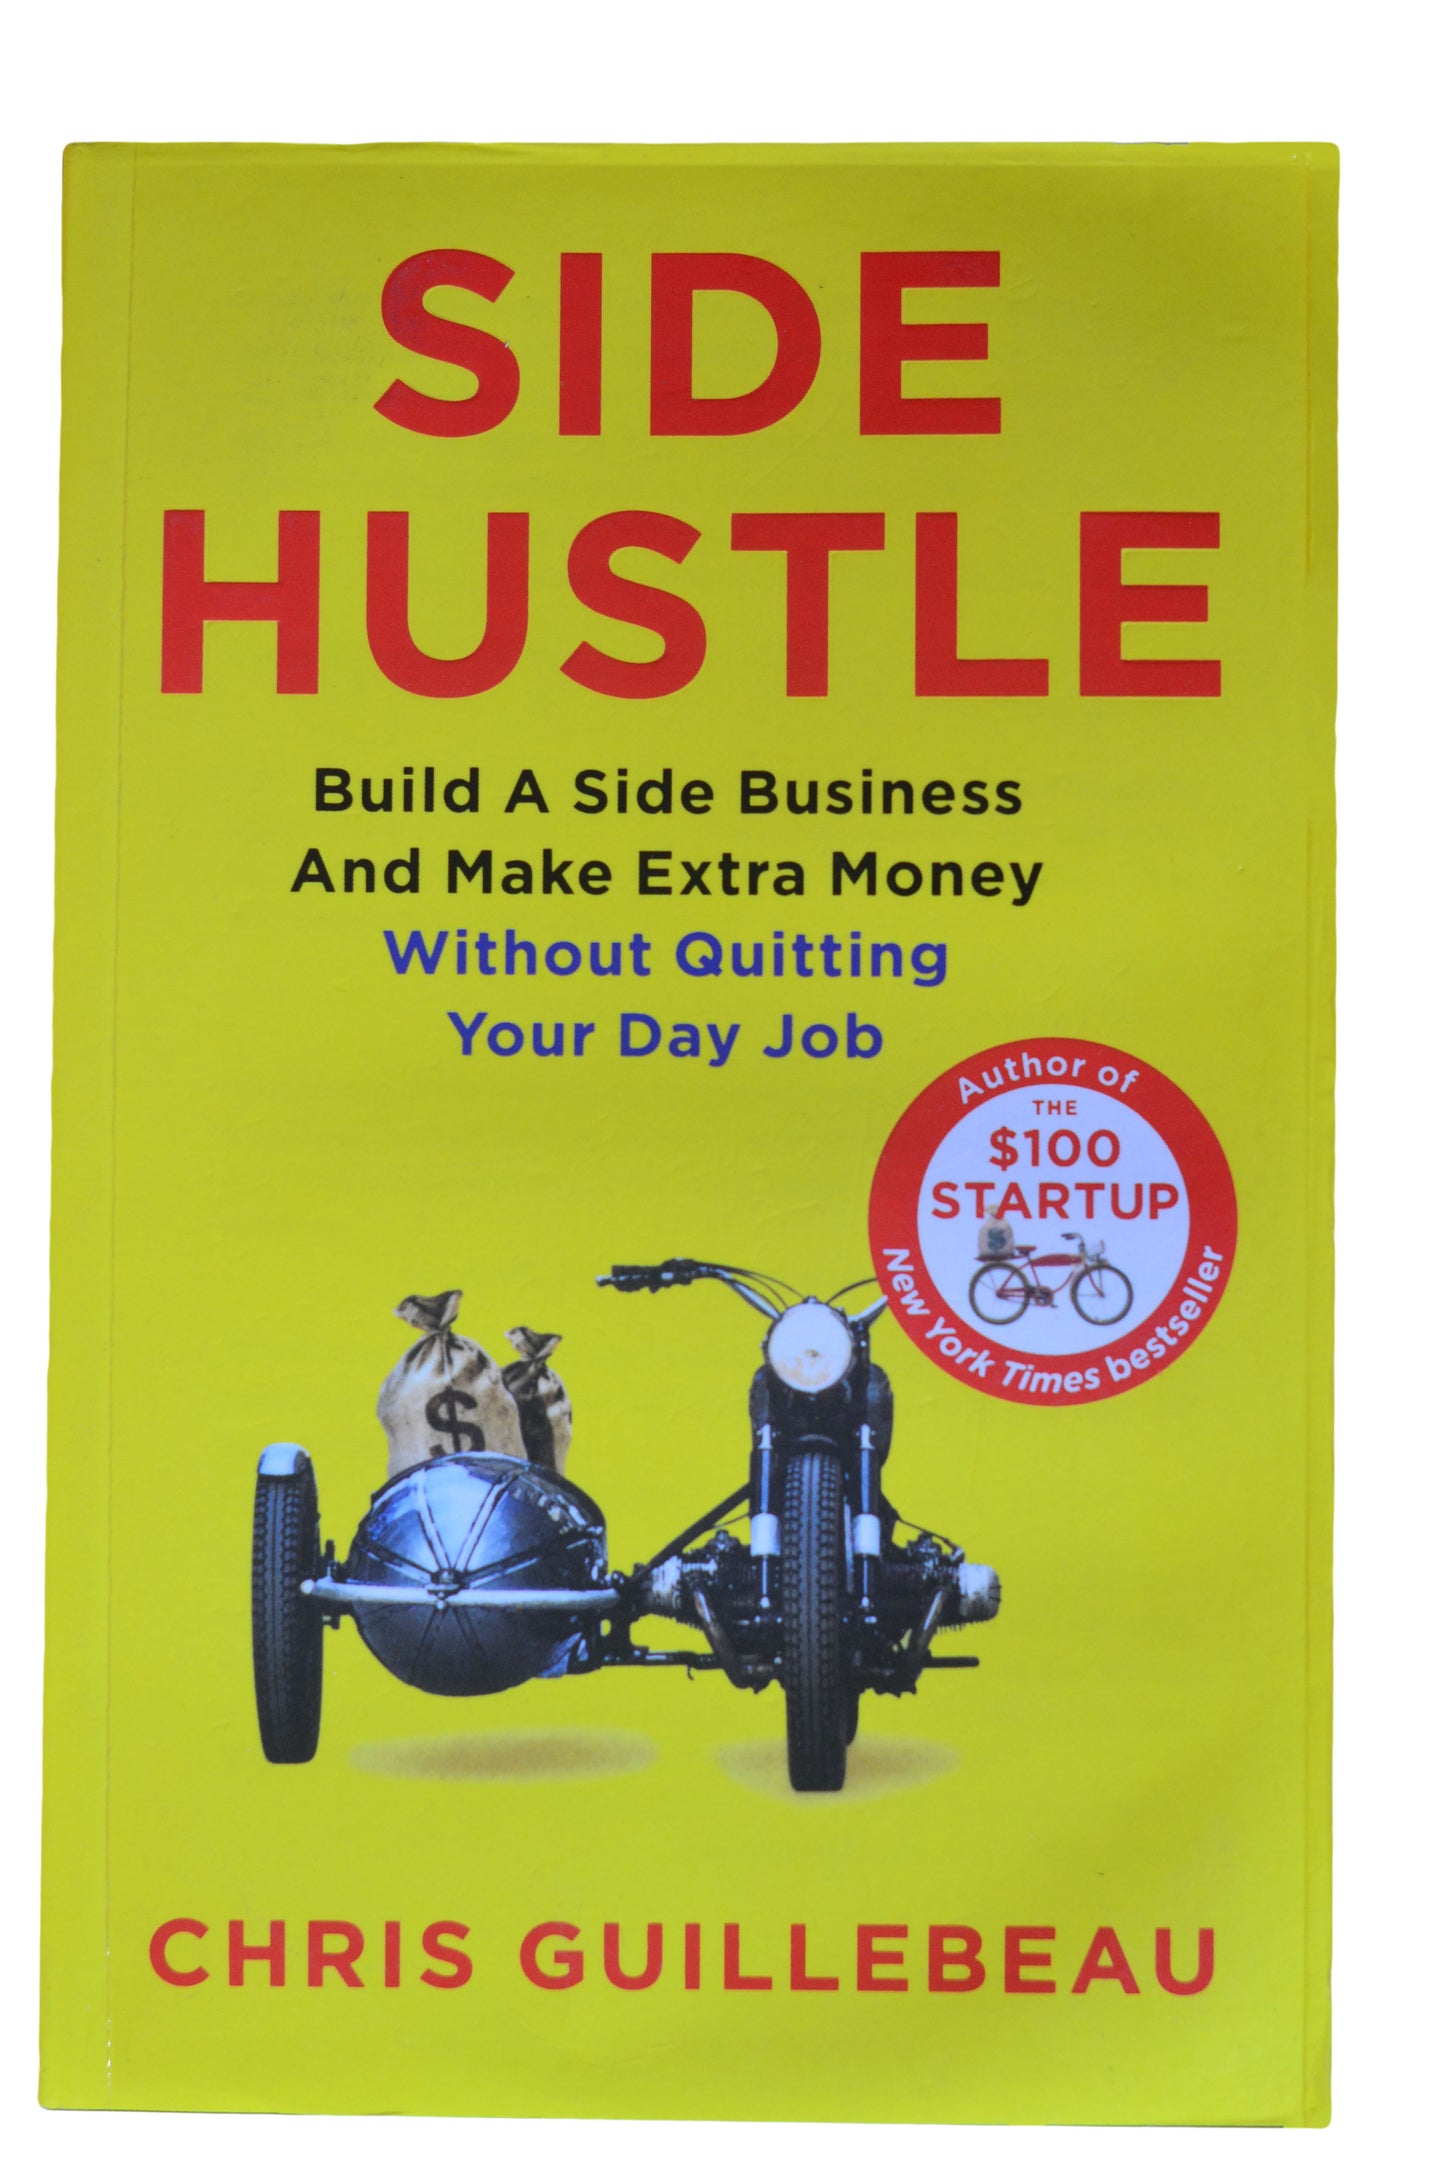 SIDE HUSTLE by  Chirs Guillebeau